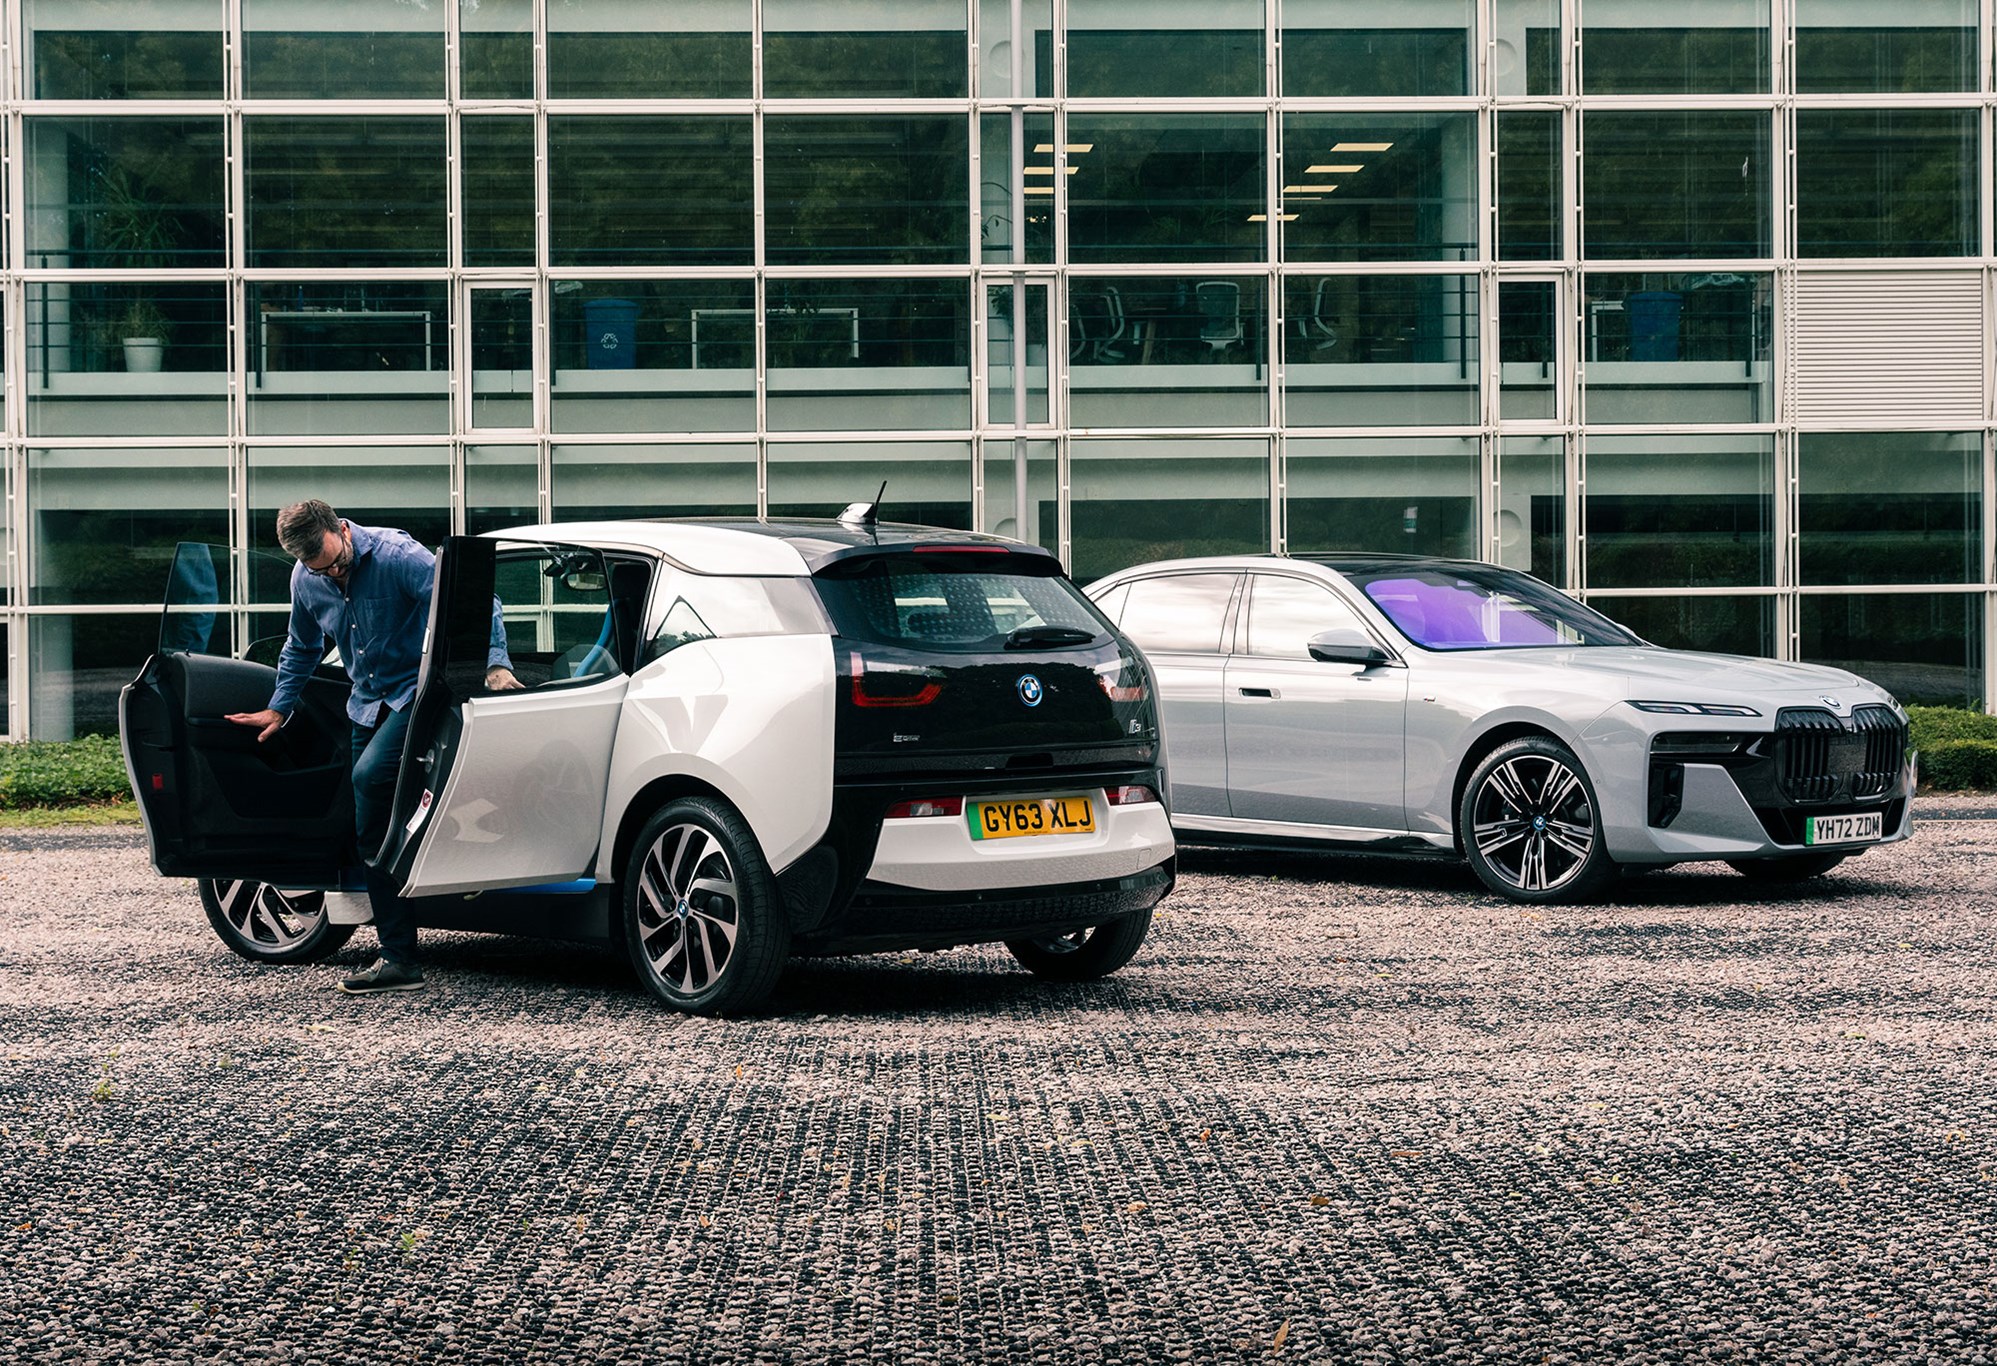 The BMW i3 could launch today and it would still feel modern and  progressive